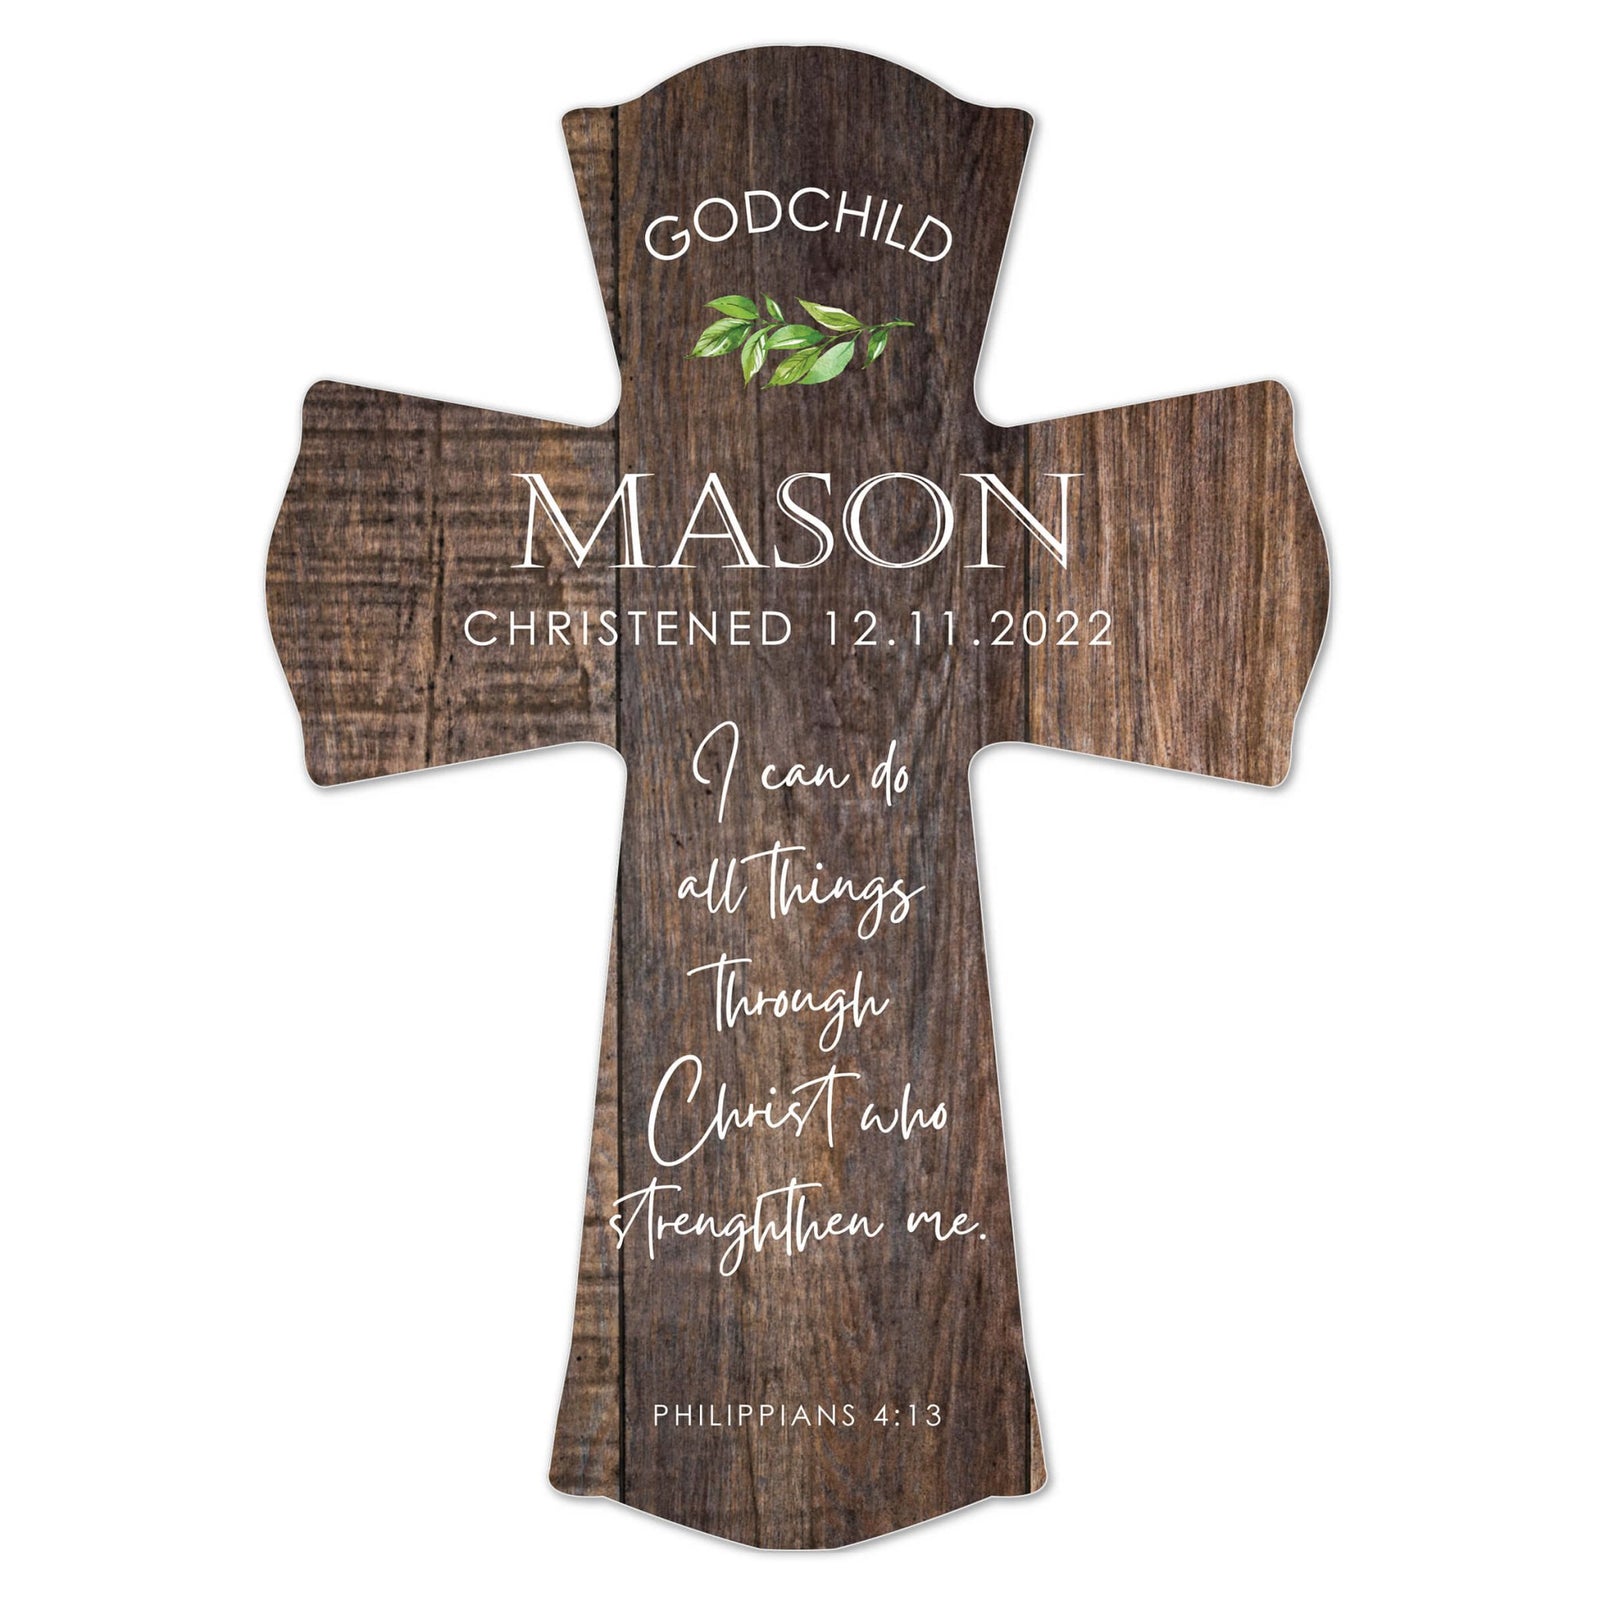 Personalized Wooden Wall Cross for Godchild - I Can Do All Things - LifeSong Milestones